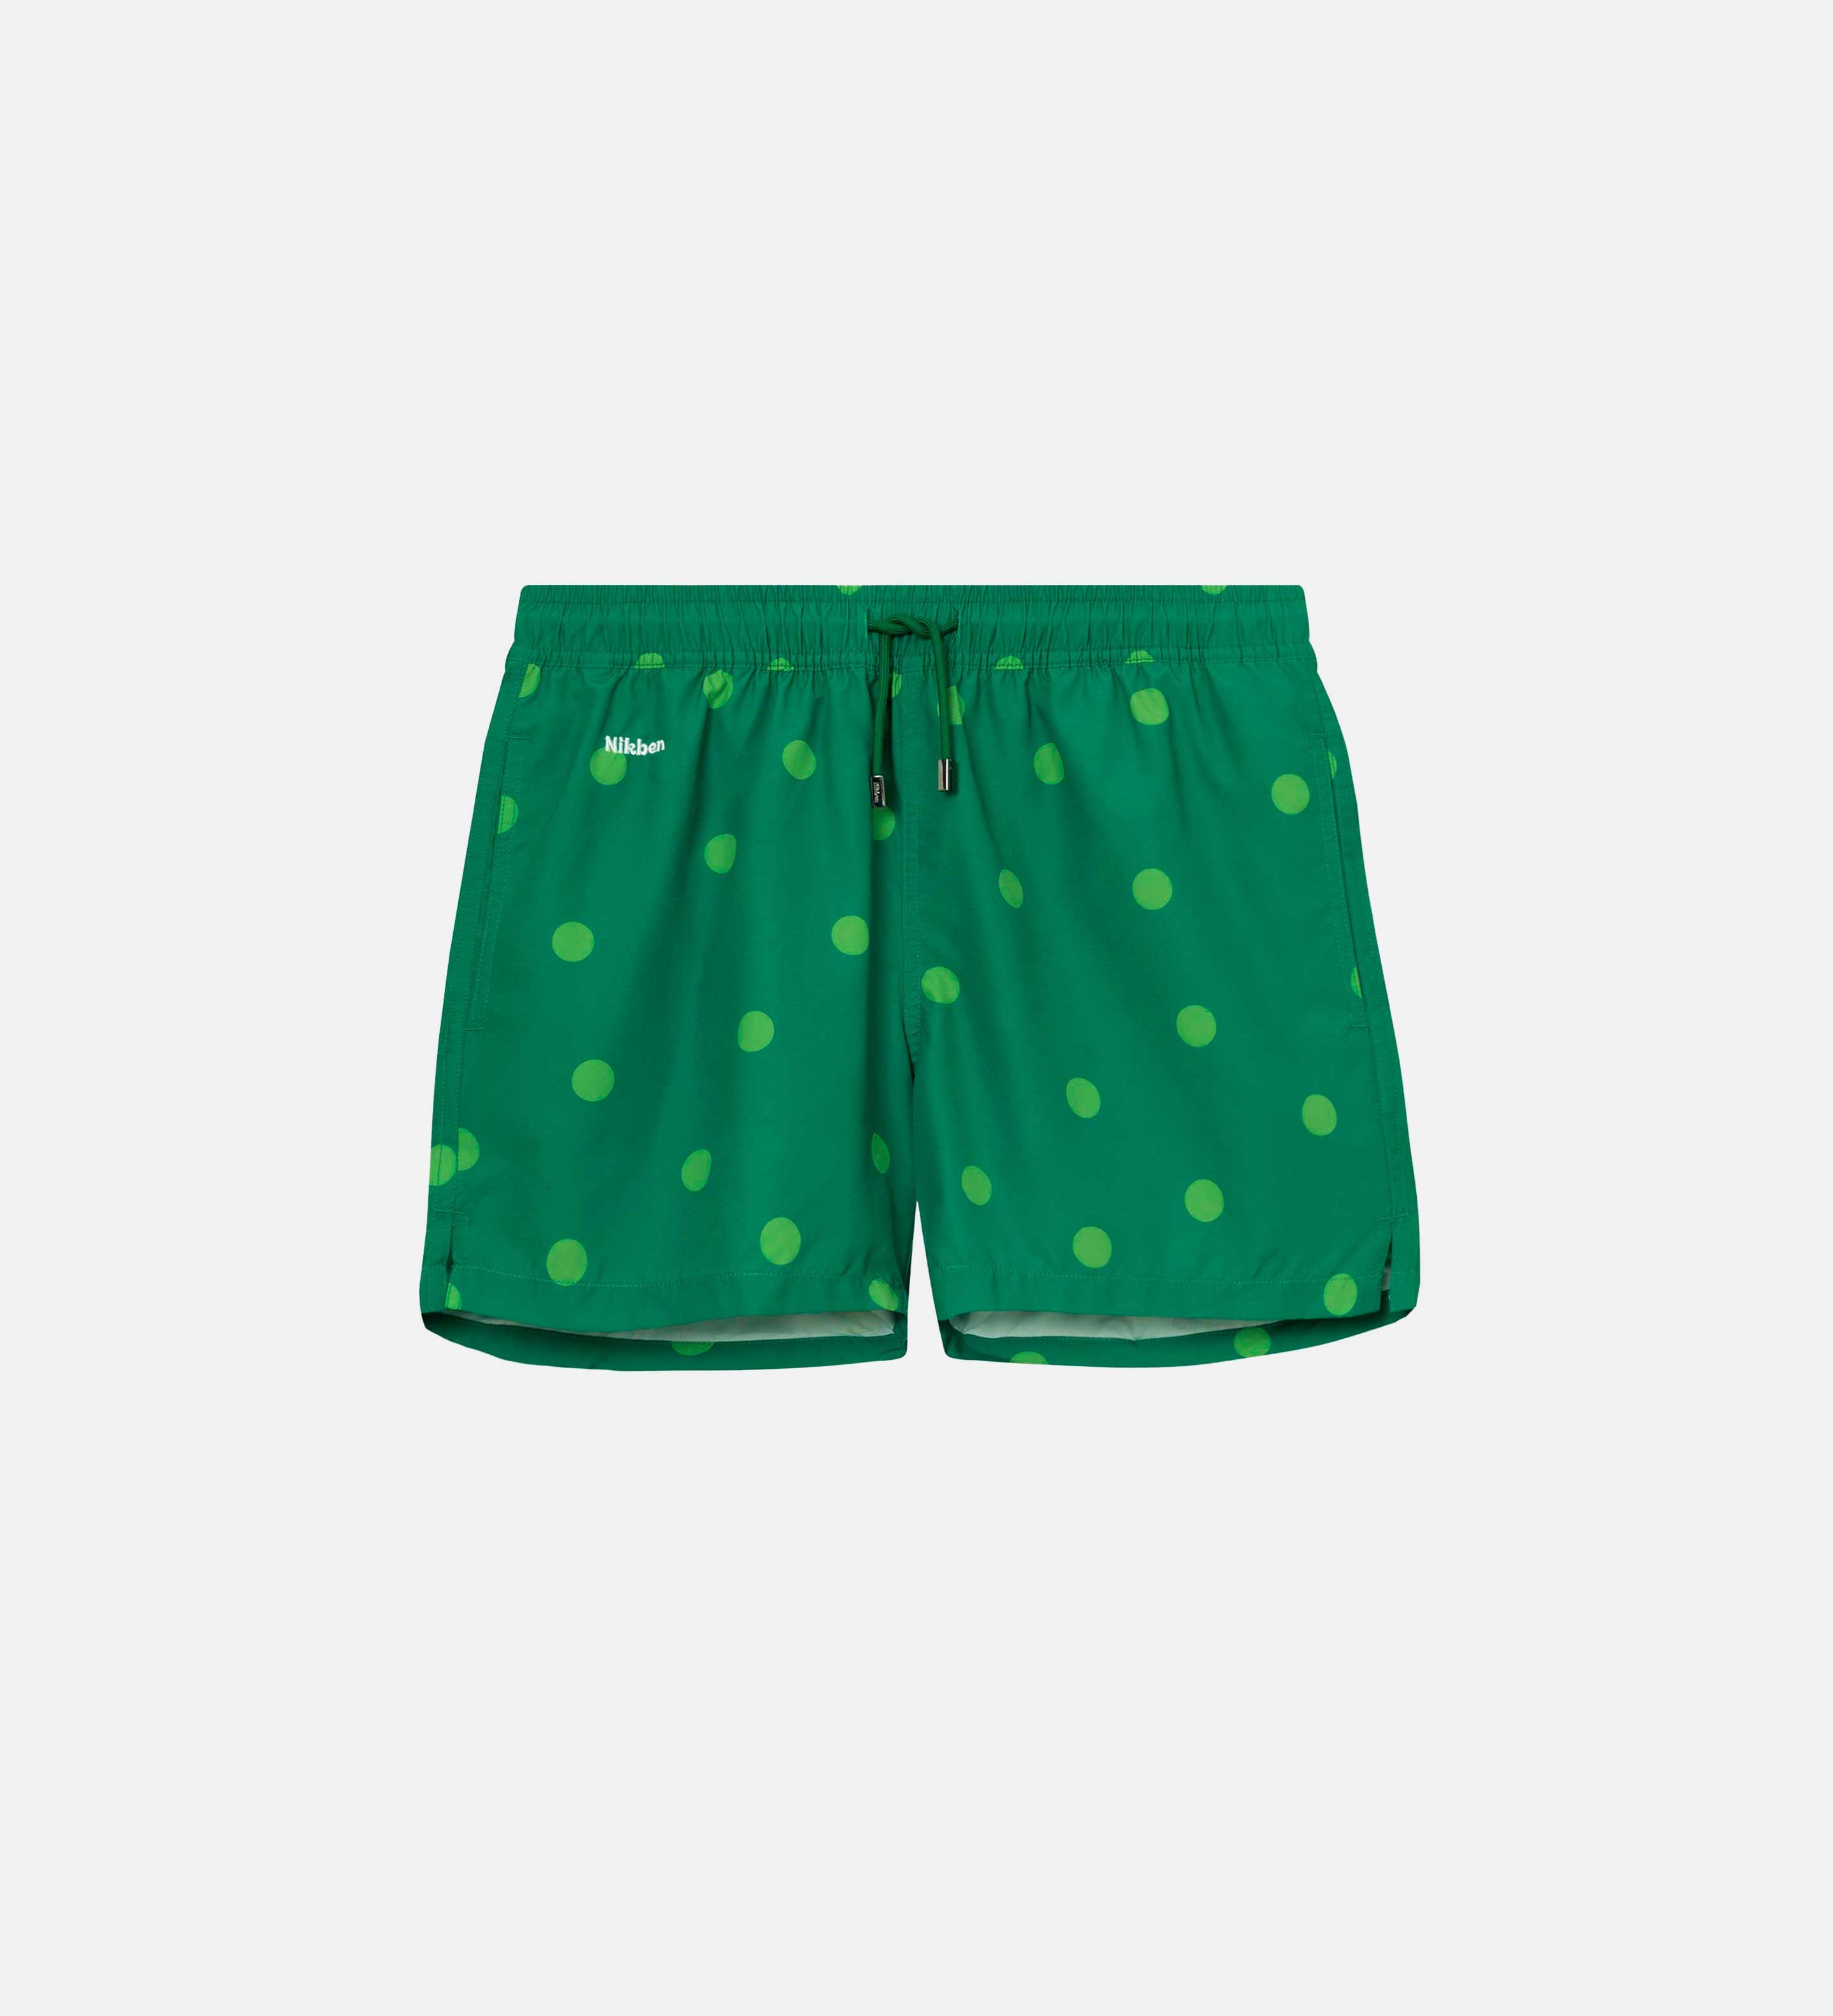 Green swim trunks with light green dots print. Mid length shorts with drawstring waistband and two side pockets.